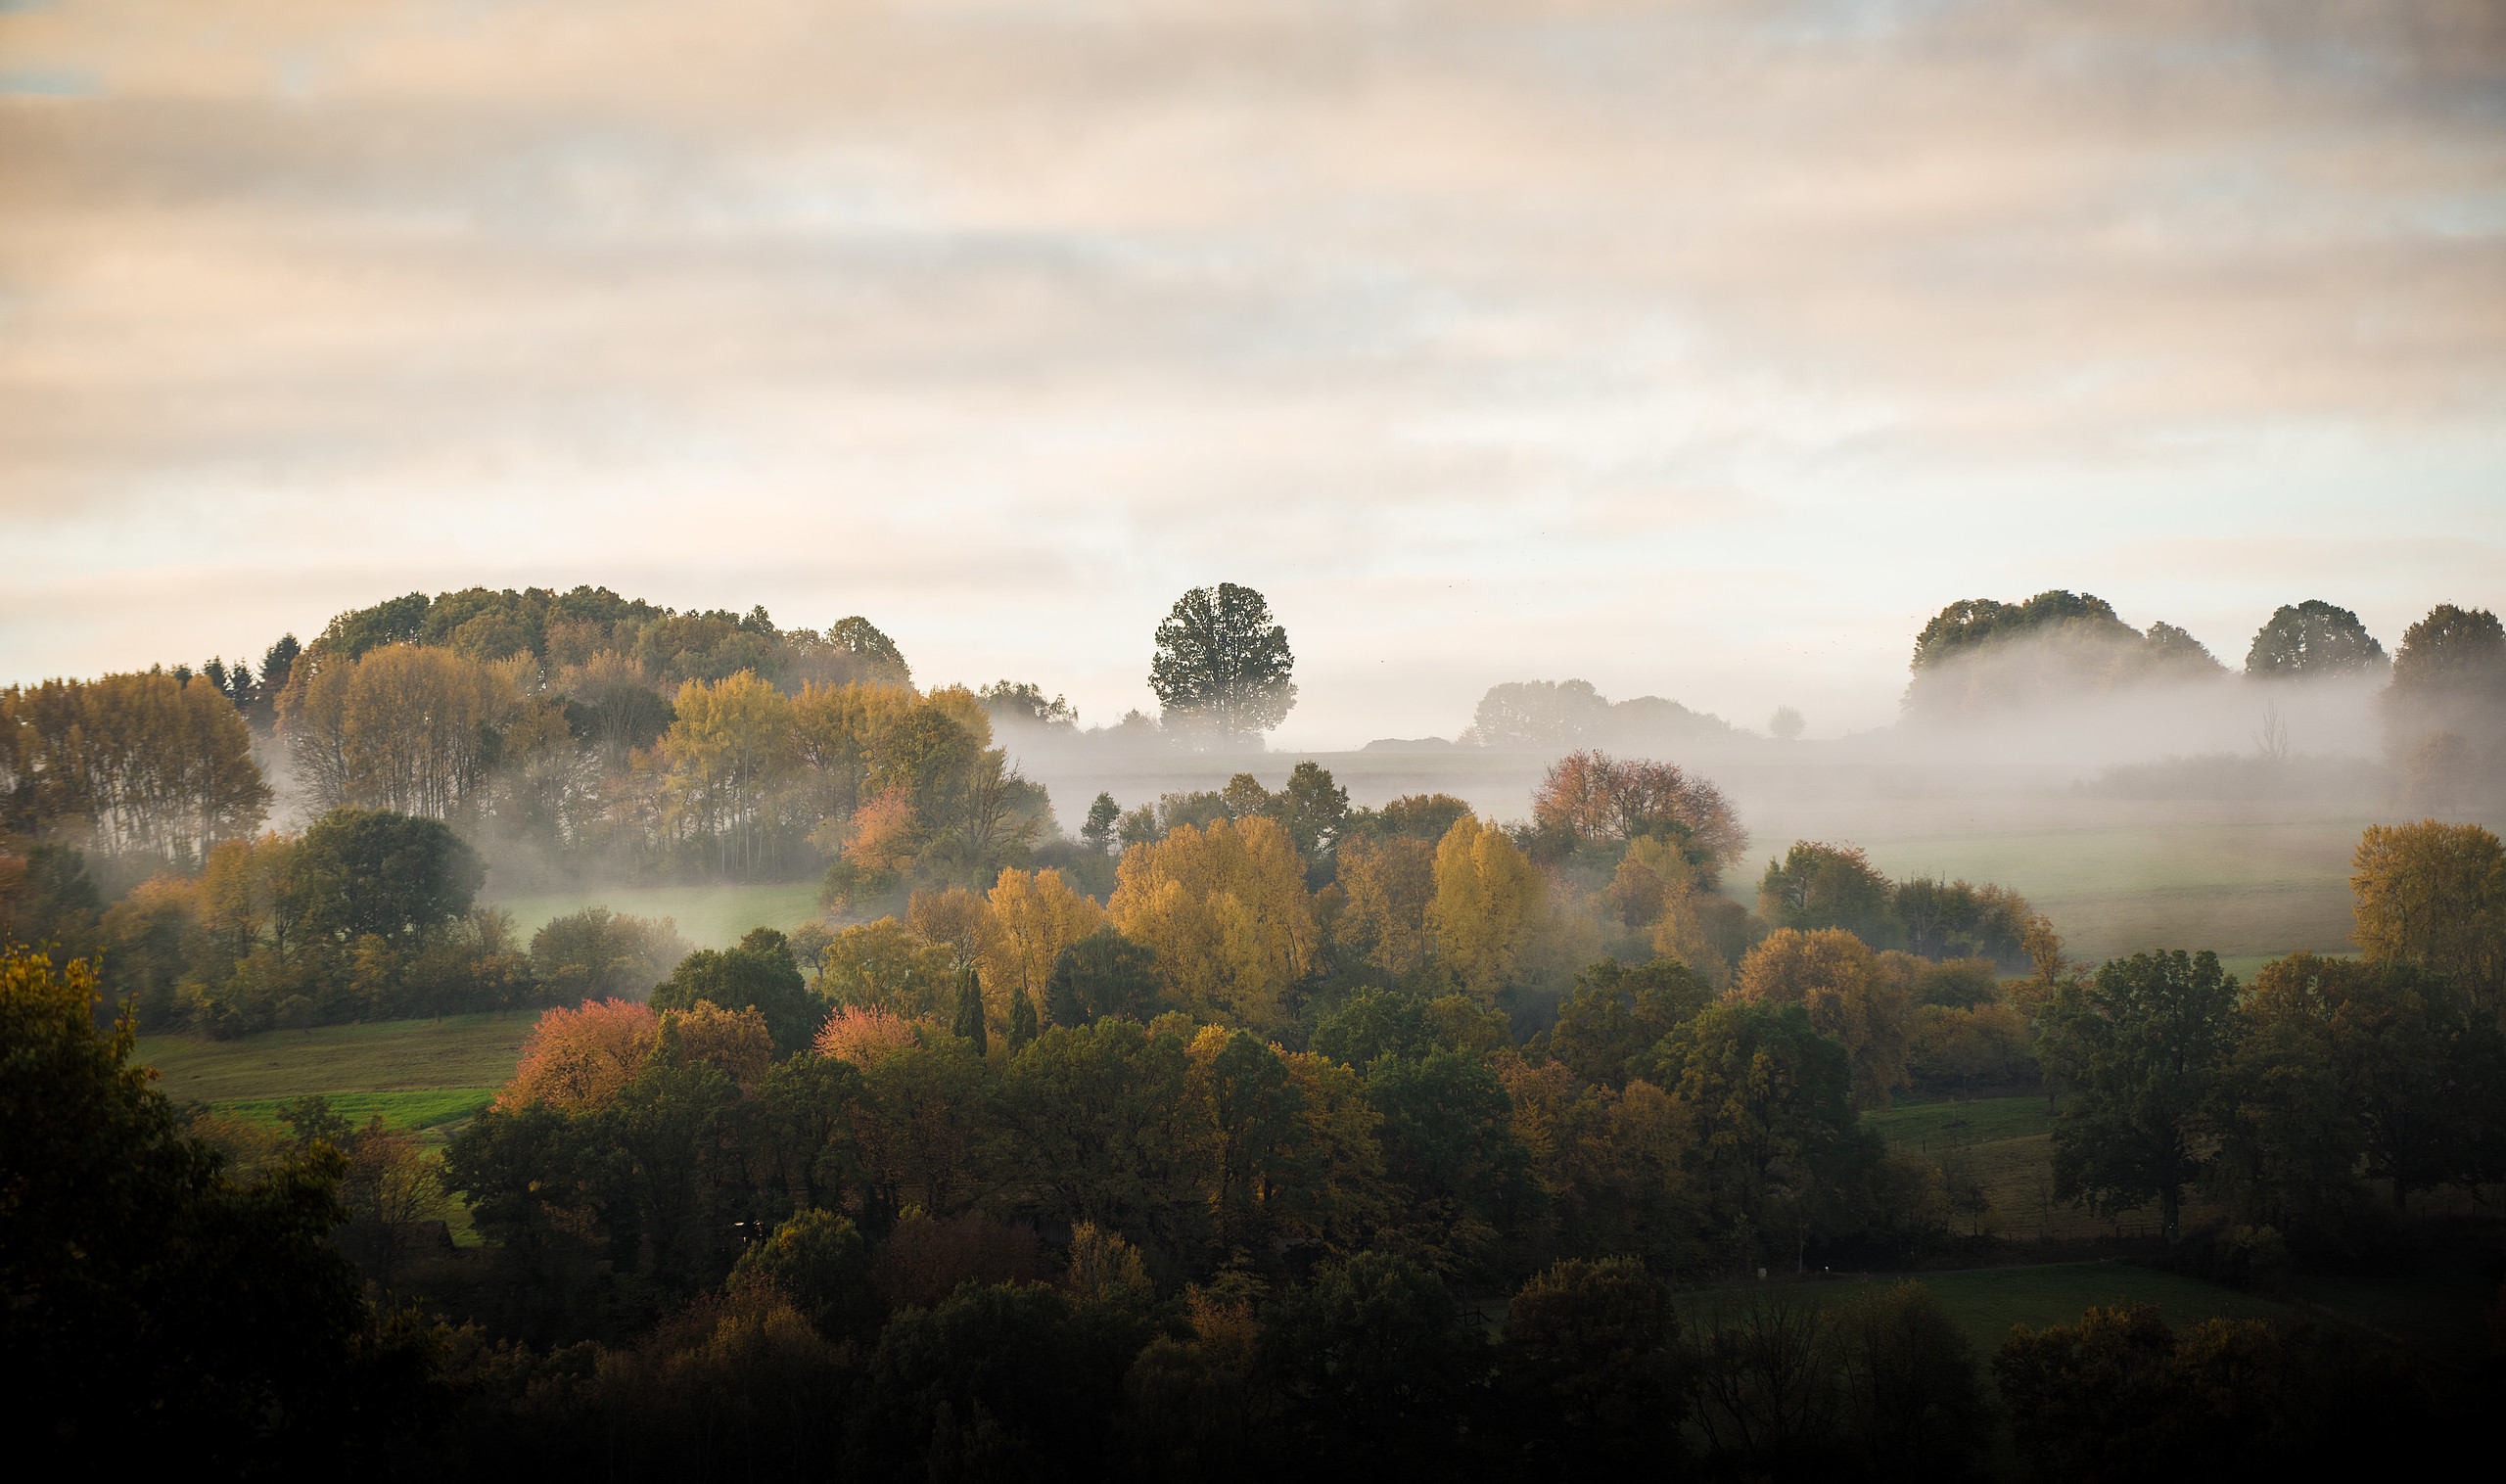 [Translate to English:] View of misty trees in the Spessart